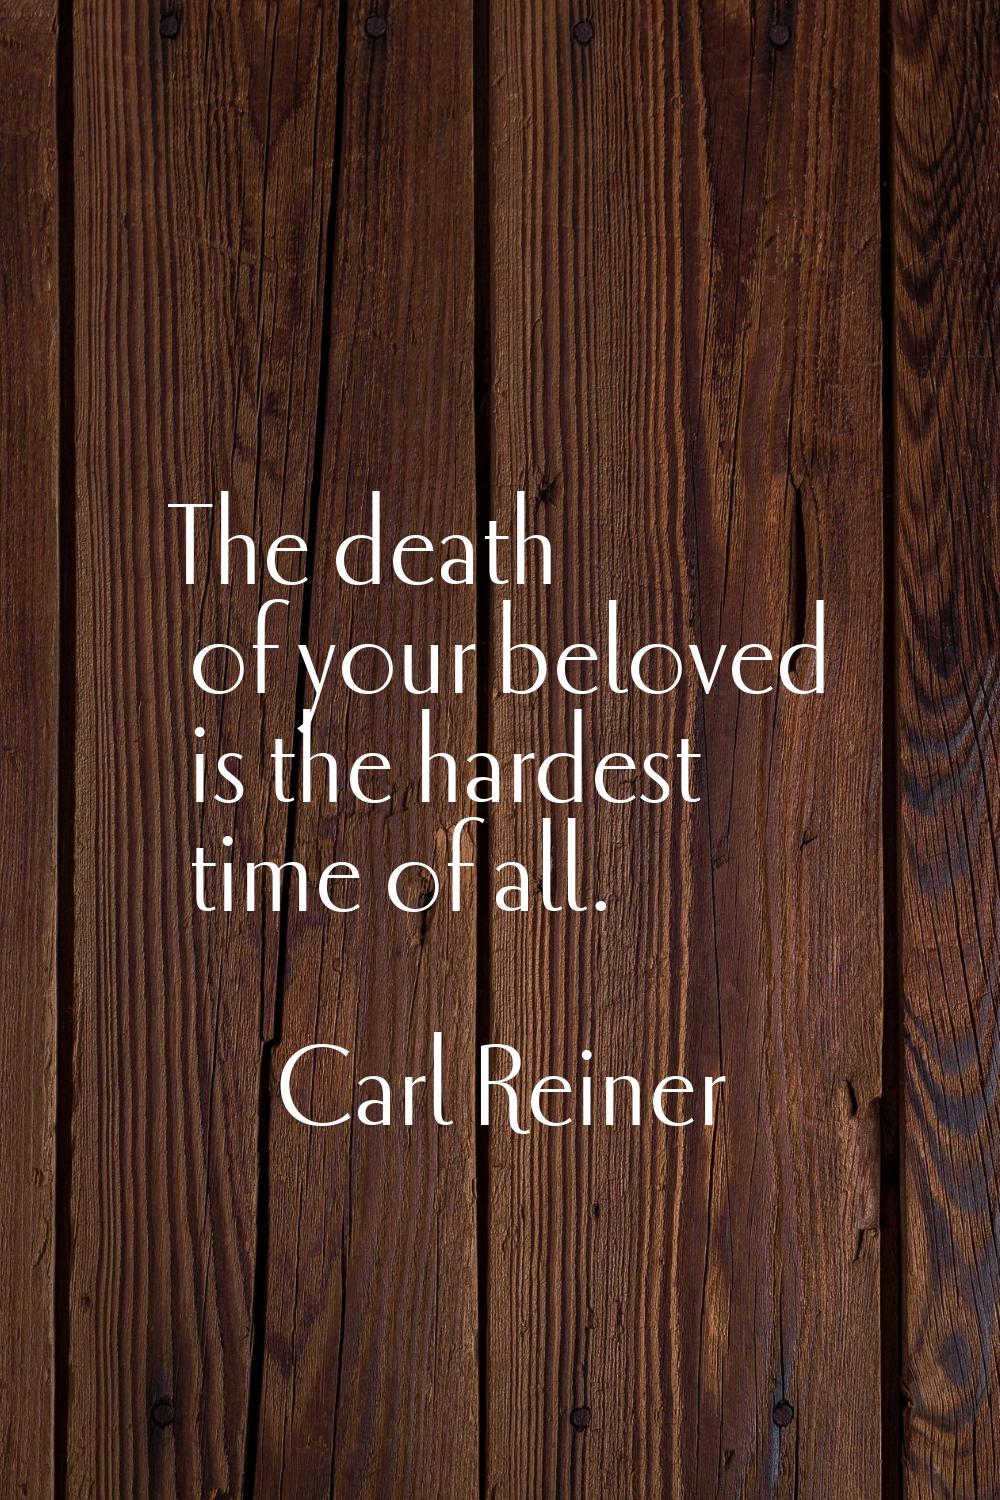 The death of your beloved is the hardest time of all.